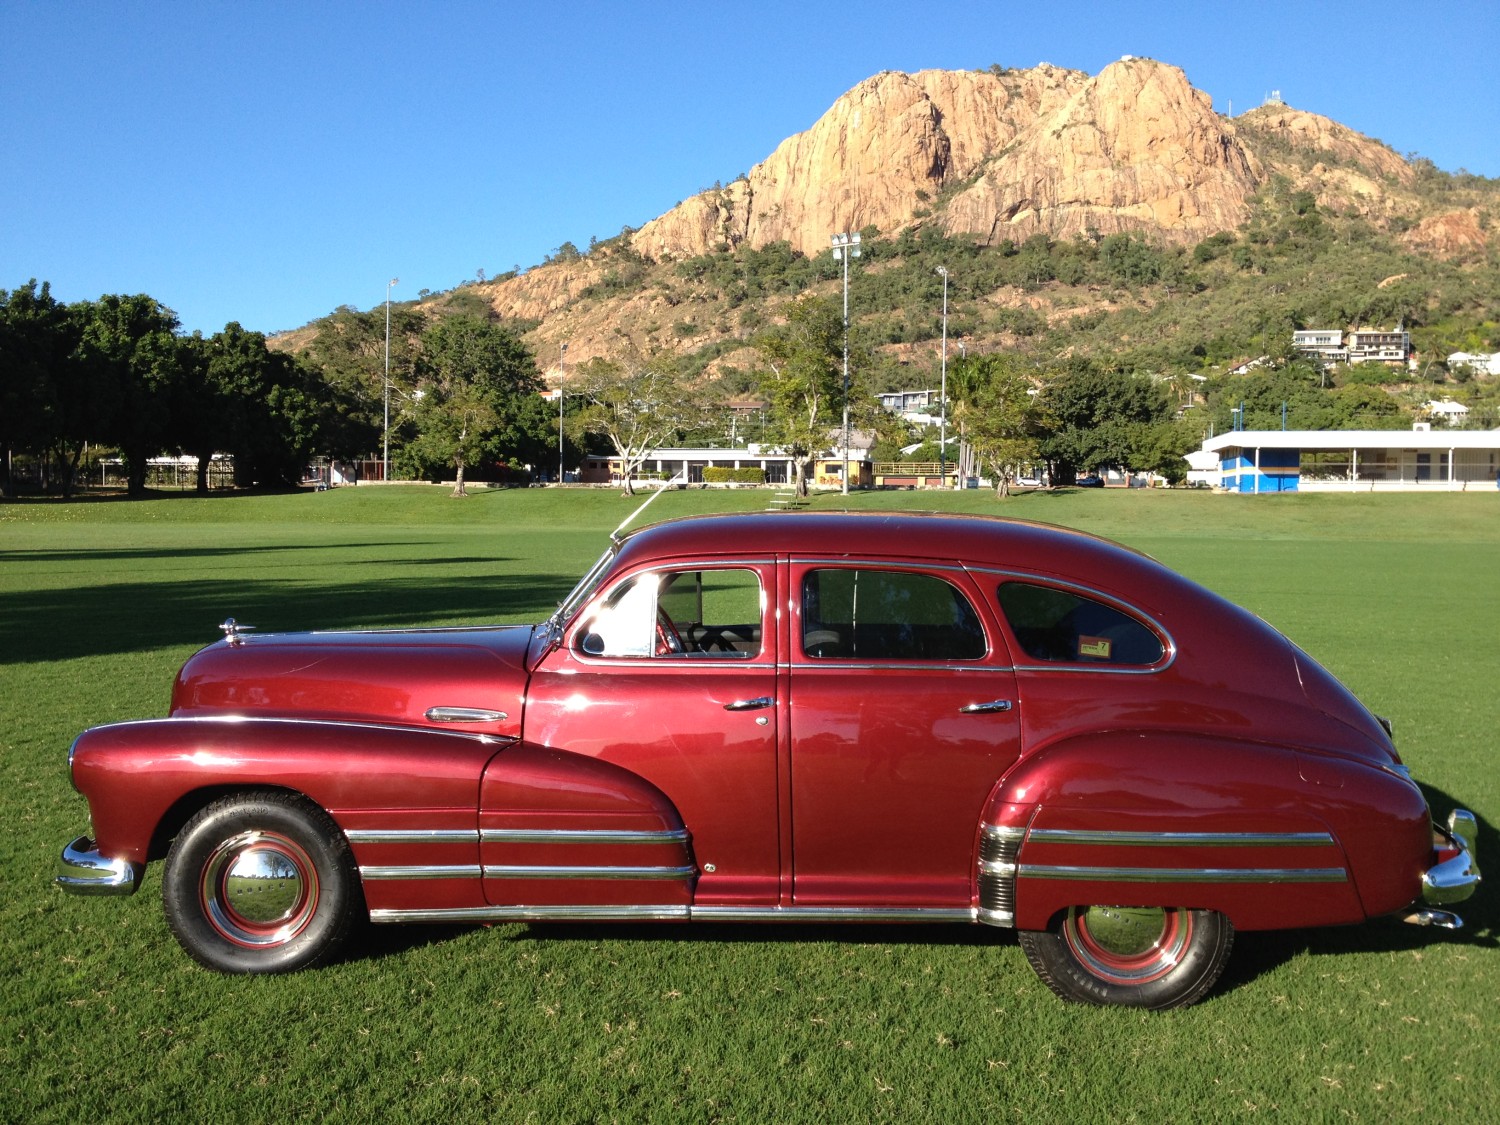 1946 Buick Special - 1946Buick - Shannons Club